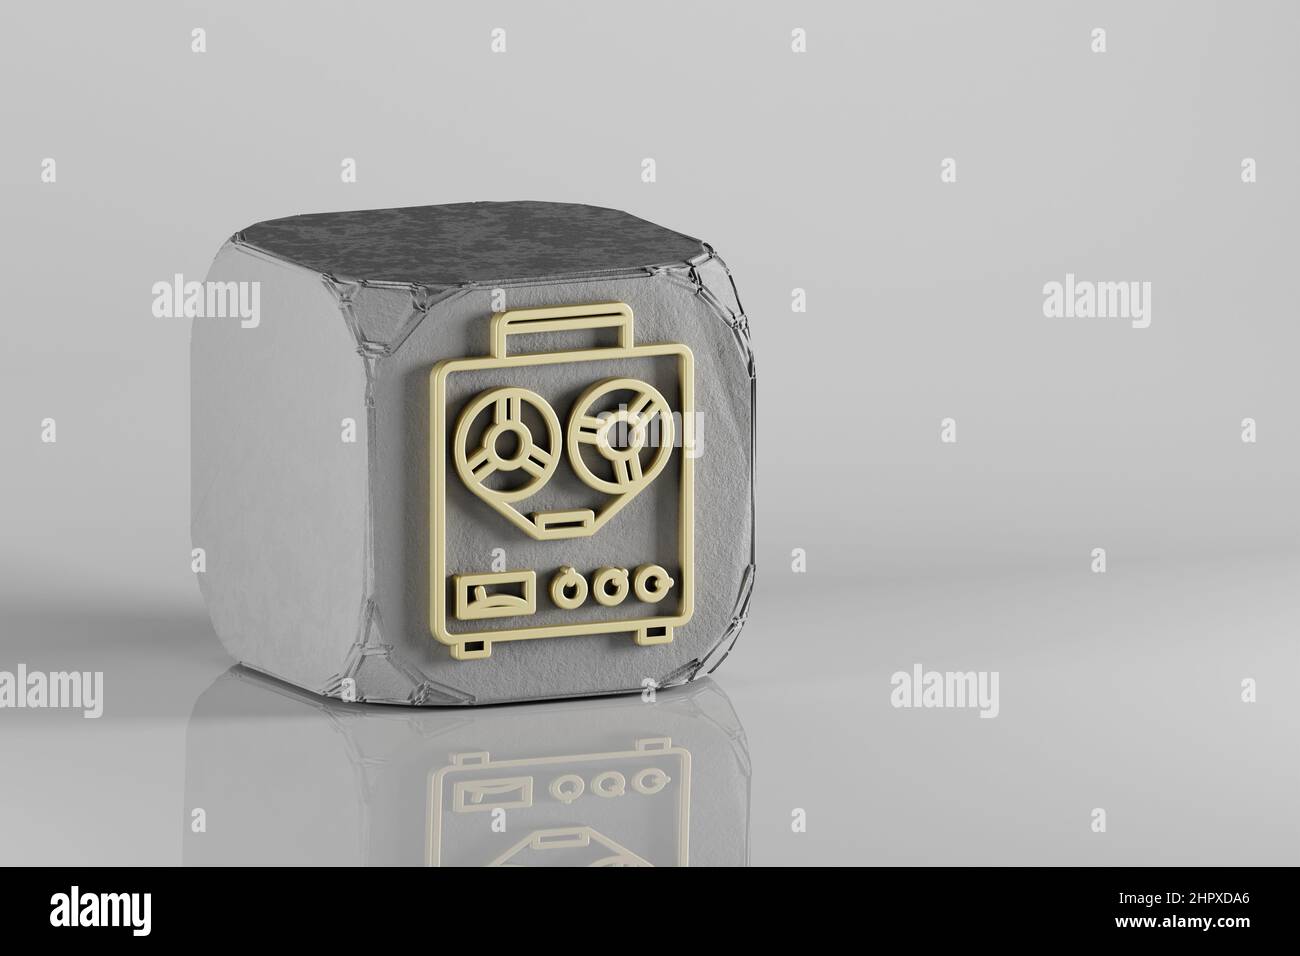 Old Audio Recorder icon. Beautiful Golden music symbol icons on a beton cube and white ceramic background. 3d rendering illustration. Background patte Stock Photo